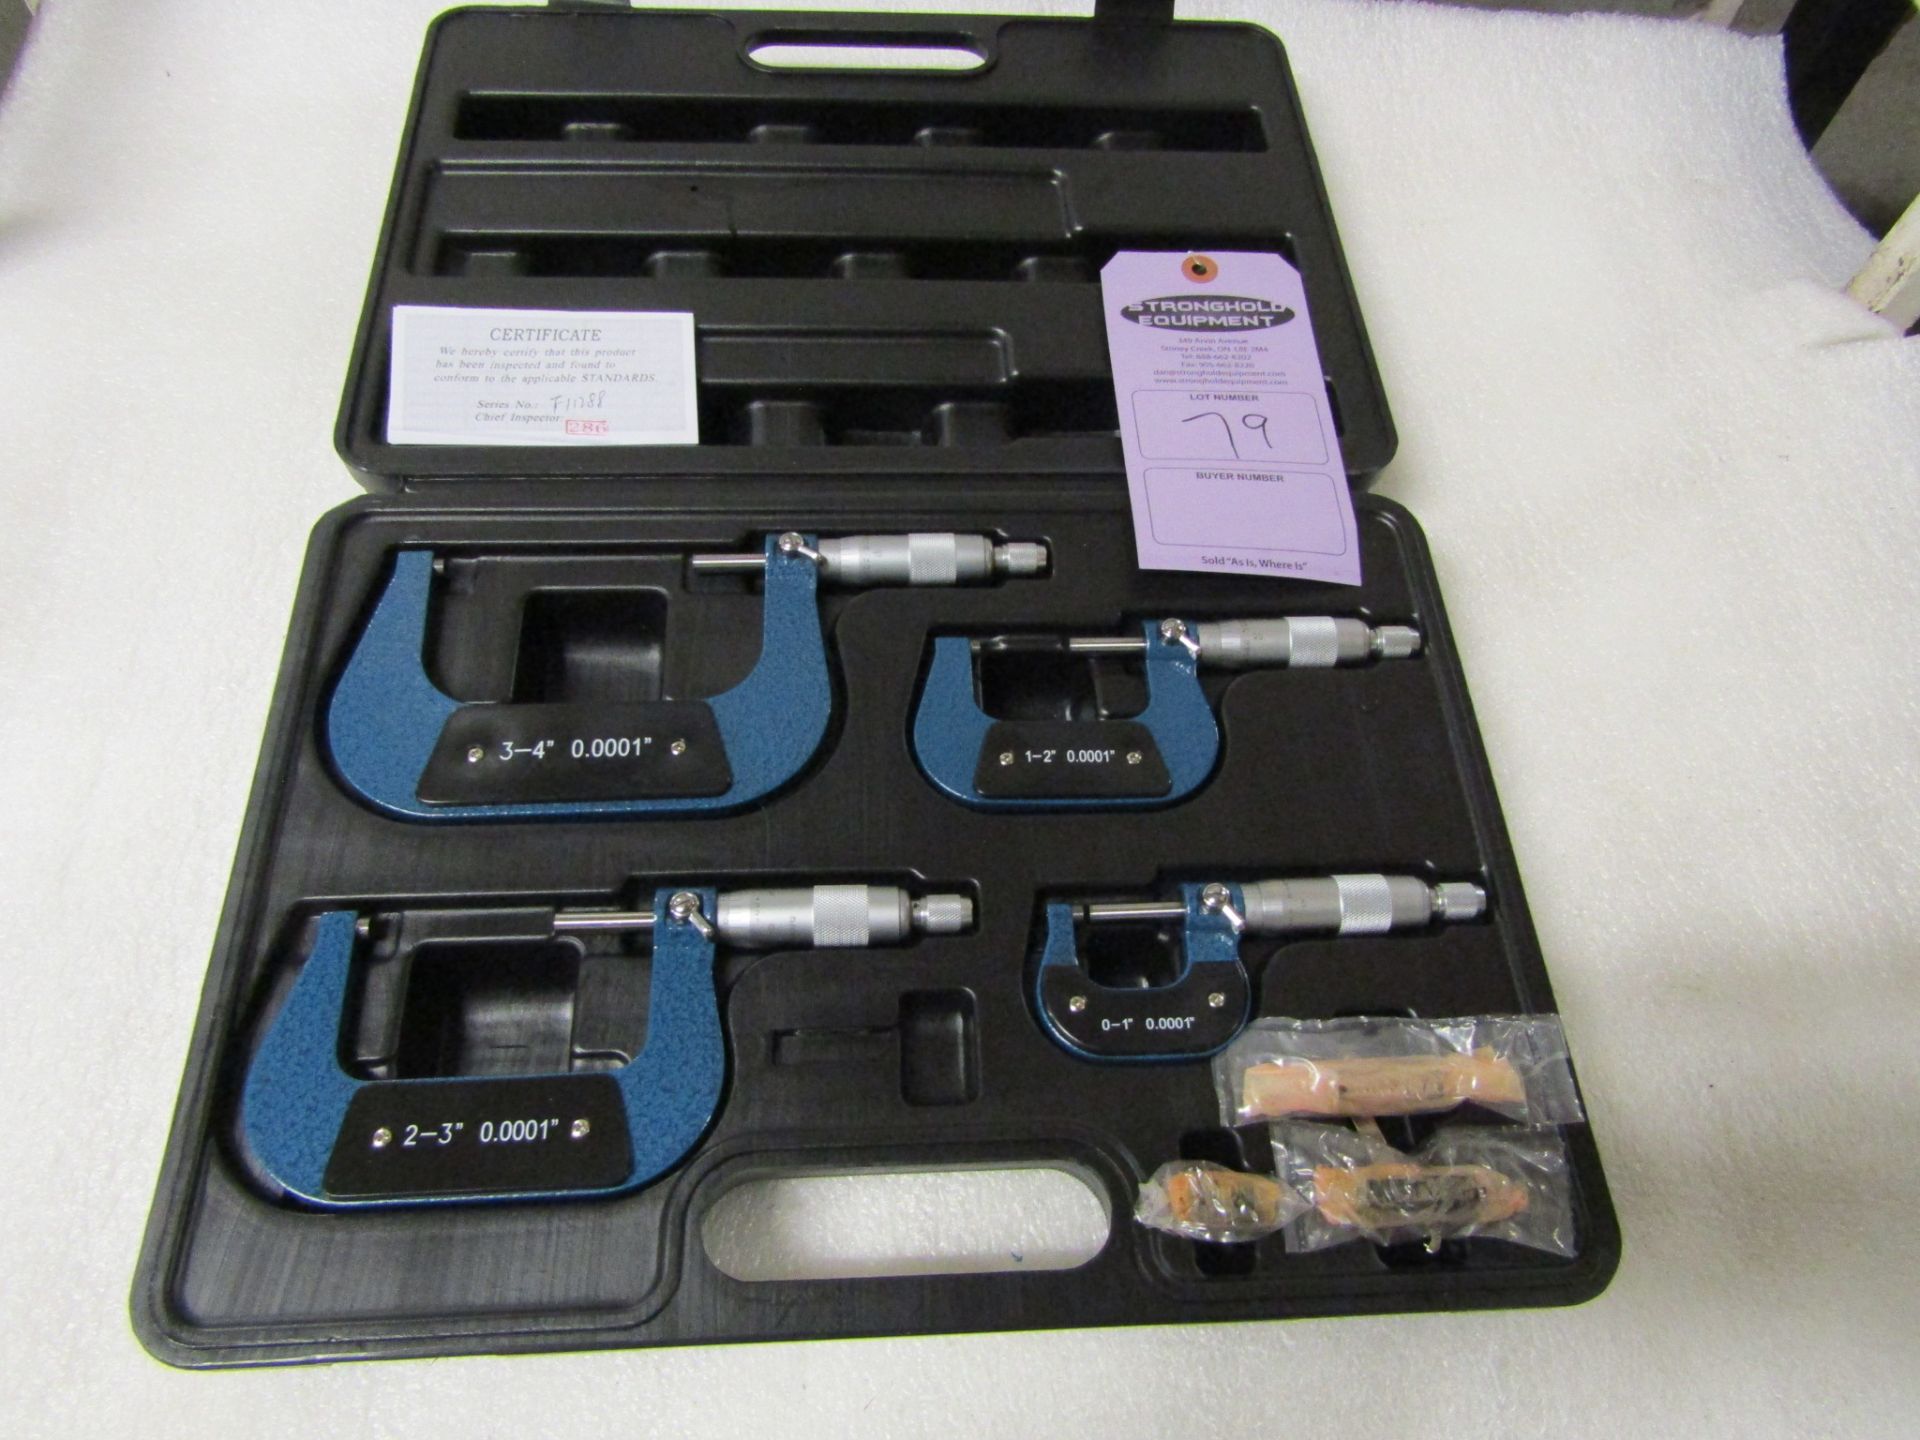 MINT 0-4" / 0-100mm Micrometer Set in case with standard calibration rods